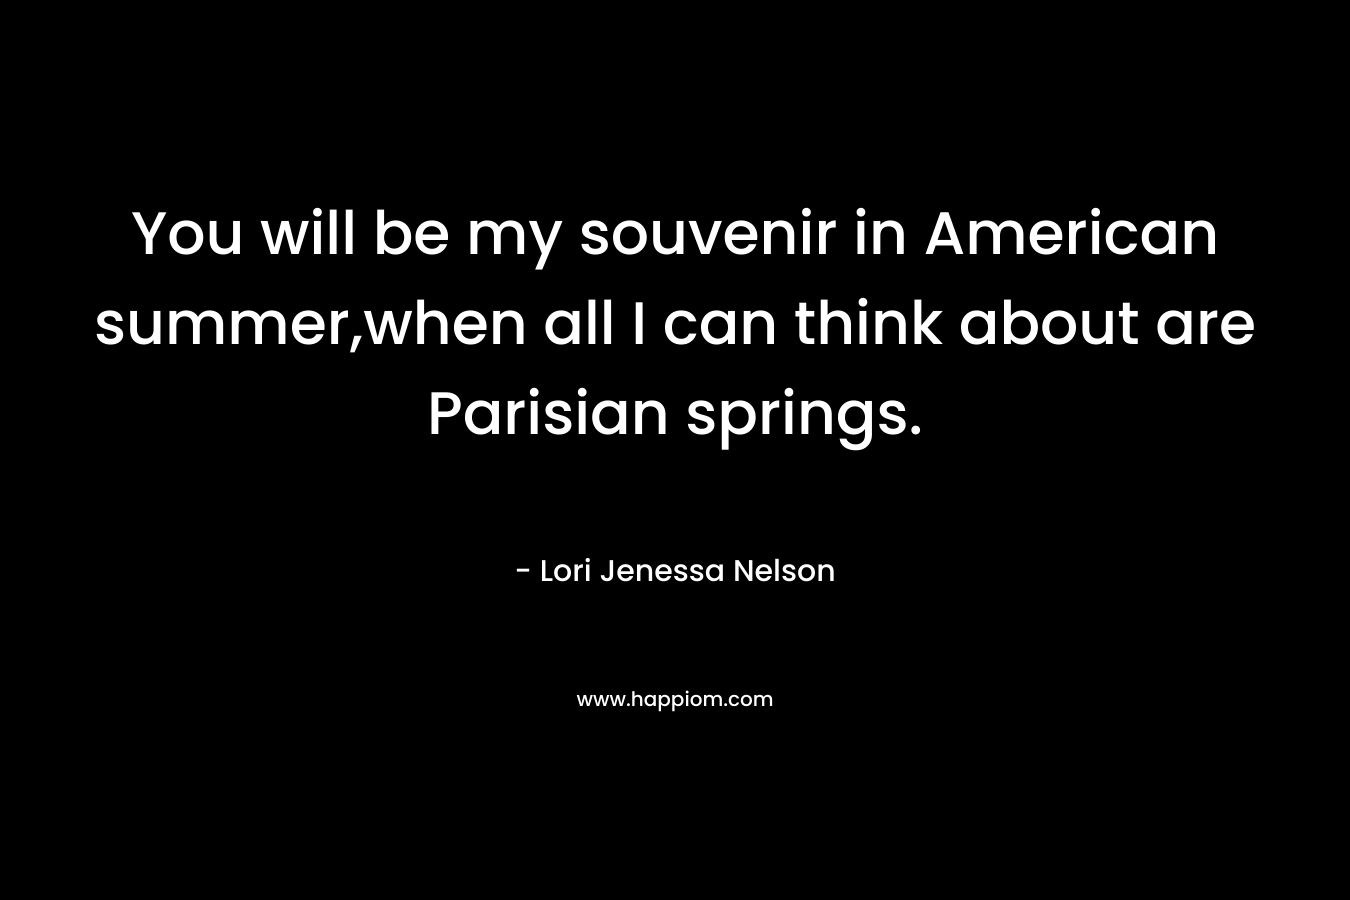 You will be my souvenir in American summer,when all I can think about are Parisian springs. – Lori Jenessa Nelson